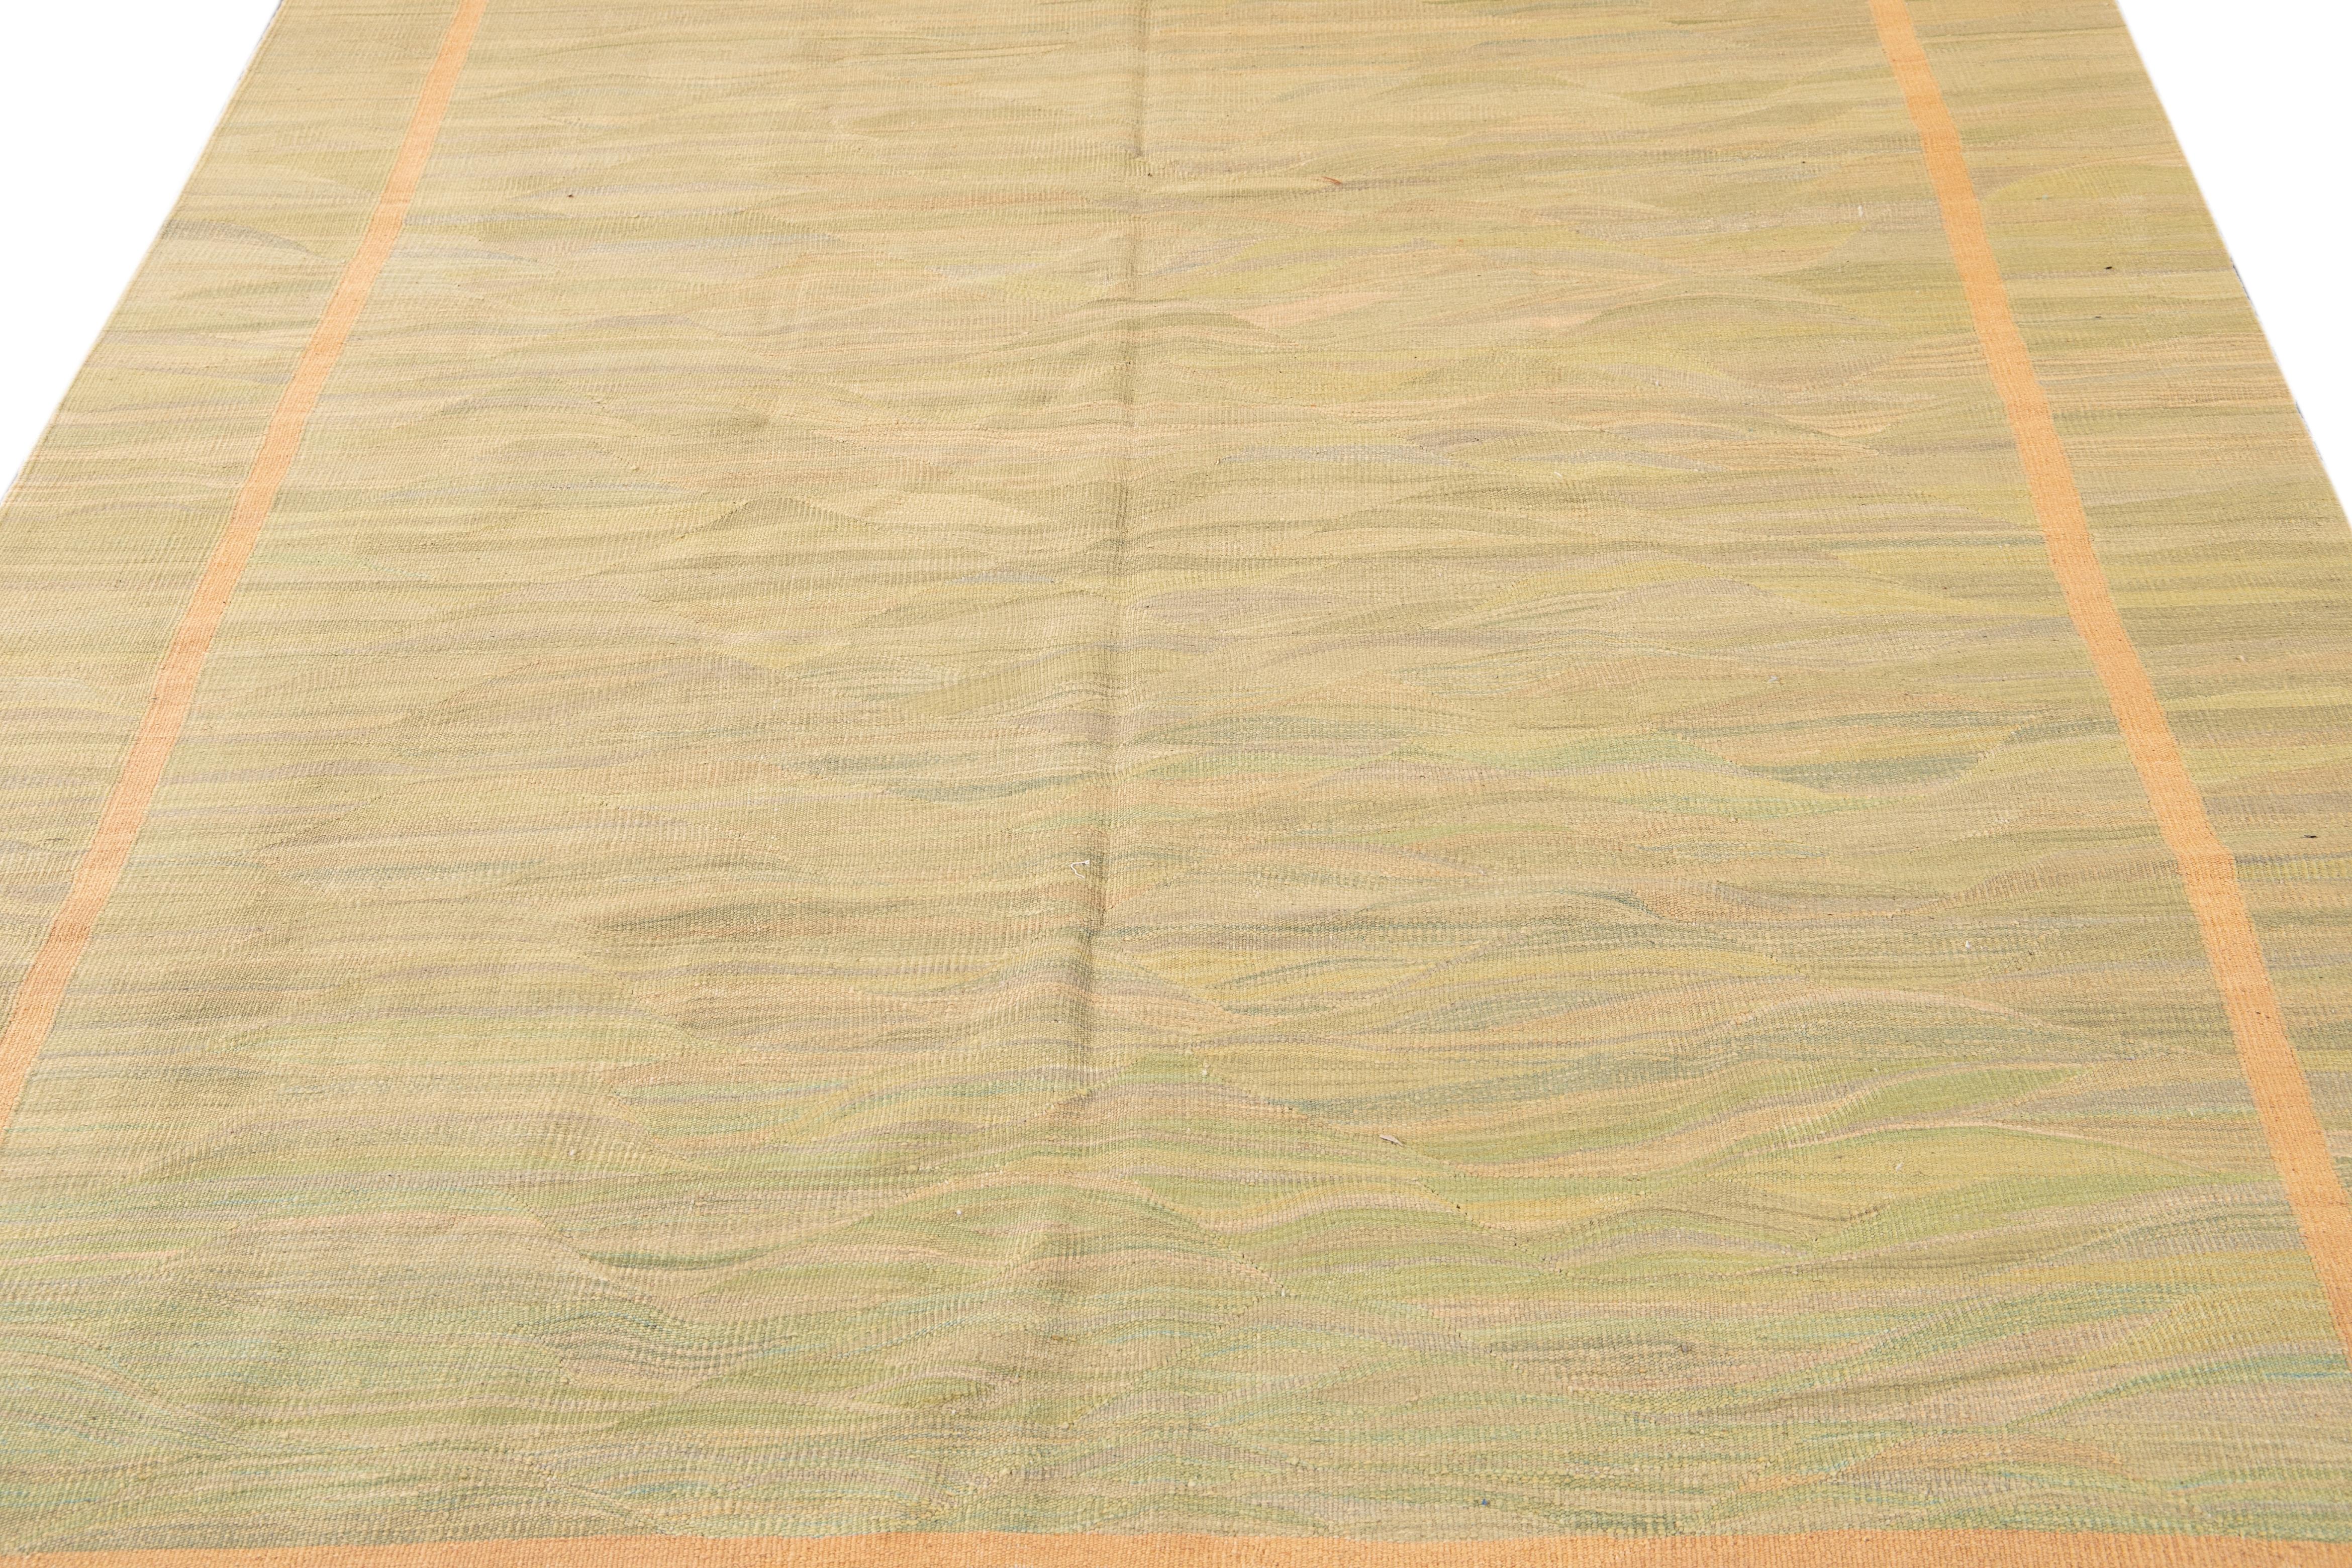 Modern Flatweave Kilim Wool Rug Handmade With Green & Beige Color Design In New Condition For Sale In Norwalk, CT